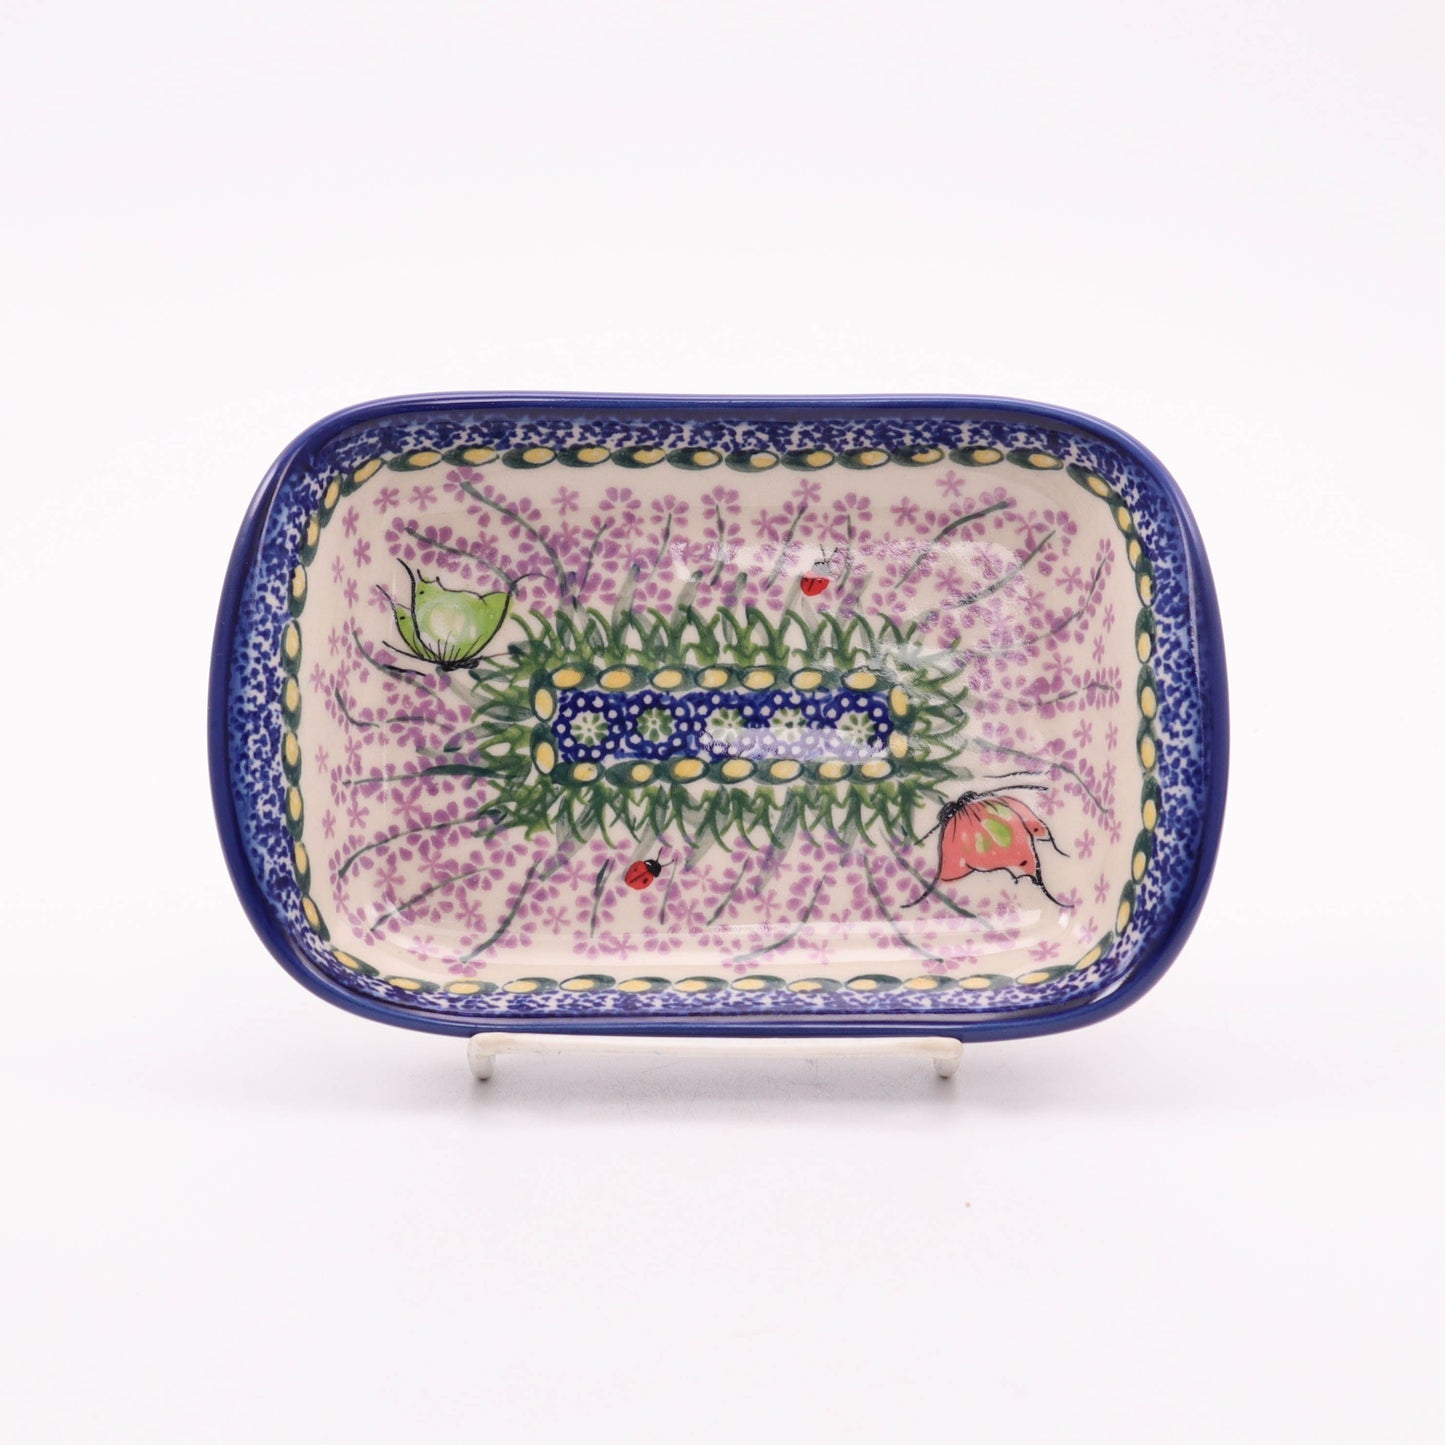 7.5"x5" Rectangular Dish with Handles. Patter: Lavender Fields